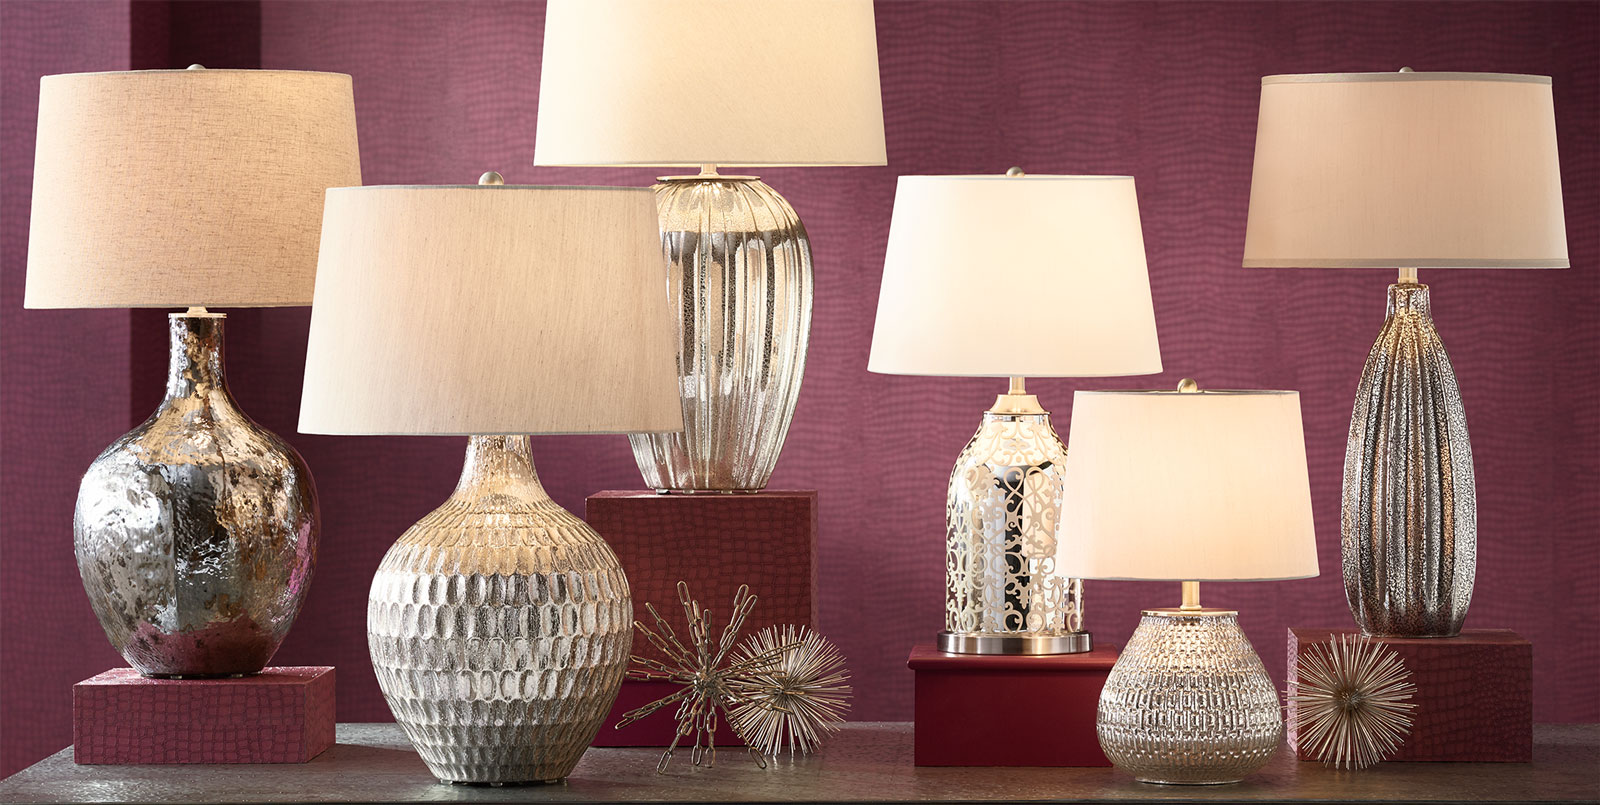 How To Select The Perfect Table Lamp, How To Determine Height Of Table Lamp